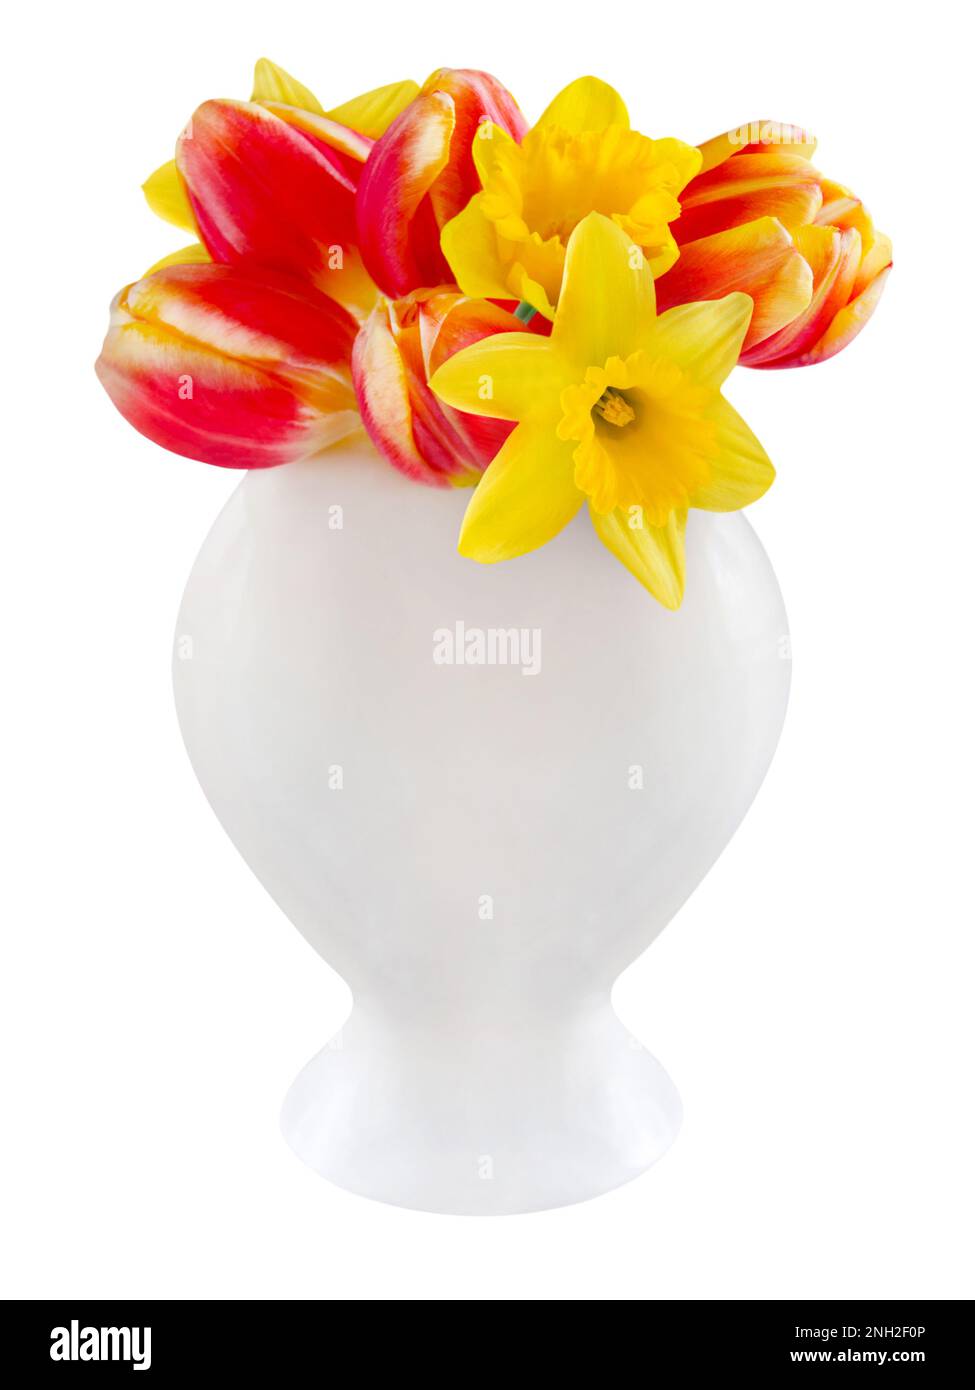 Tulips and daffodils with flower vase isolated on white background Stock Photo